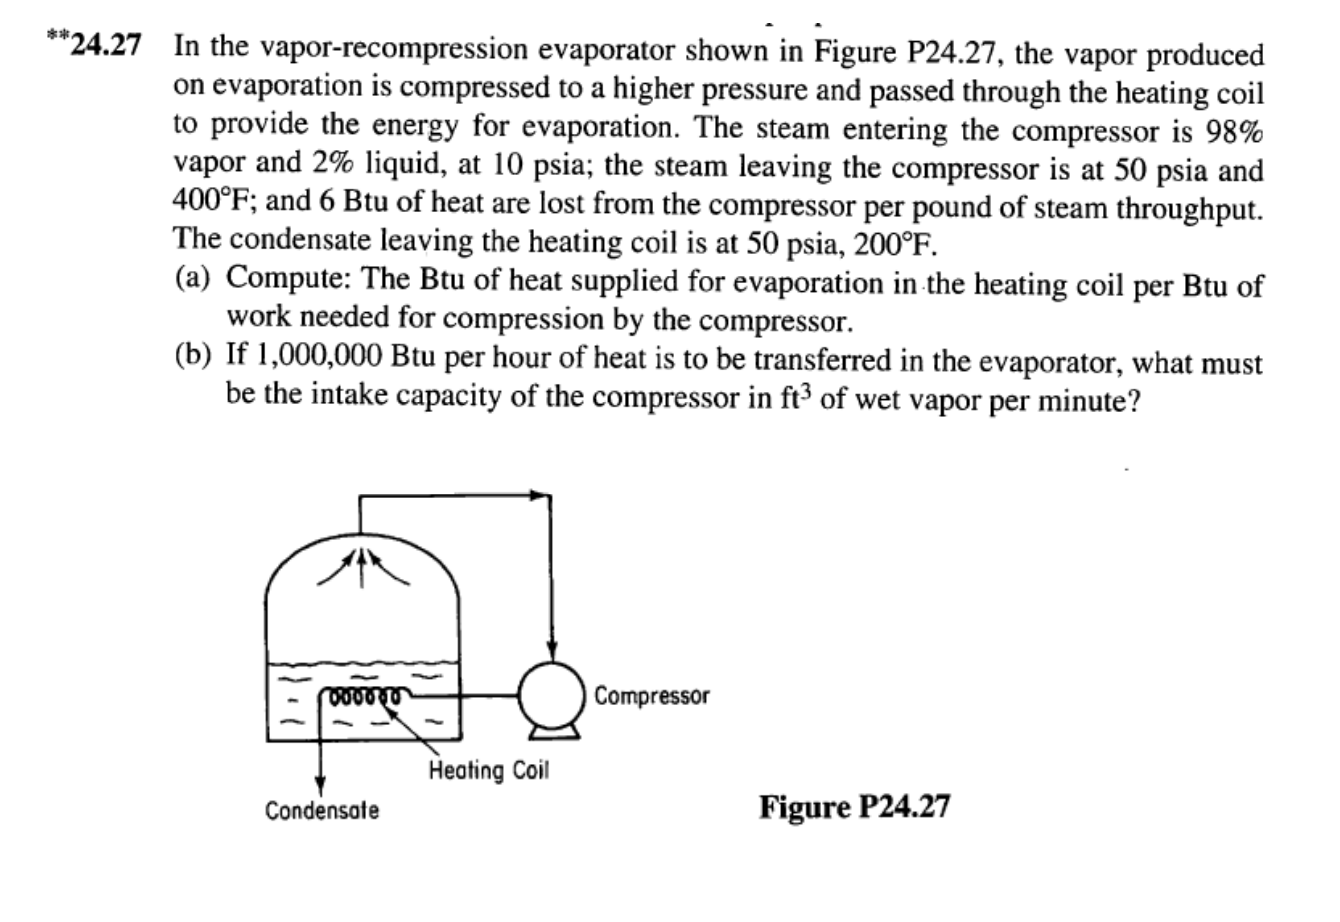 *"24.27 In the vapor-recompression evaporator shown in Figure P24.27, the vapor produced
on evaporation is compressed to a higher pressure and passed through the heating coil
to provide the energy for evaporation. The steam entering the compressor is 98%
vapor and 2% liquid, at 10 psia; the steam leaving the compressor is at 50 psia and
400°F; and 6 Btu of heat are lost from the compressor per pound of steam throughput
The condensate leaving the heating coil is at 50 psia, 200°F
(a) Compute: The Btu of heat supplied for evaporation in the heating coil per Btu of
work needed for compression by the compressor.
(b) If 1,000,000 Btu per hour of heat is to be transferred in the evaporator, what must
be the intake capacity of the compressor in ft3 of wet vapor per minute?
Compressor
O00040
Heating Coil
Figure P24.27
Condensate
